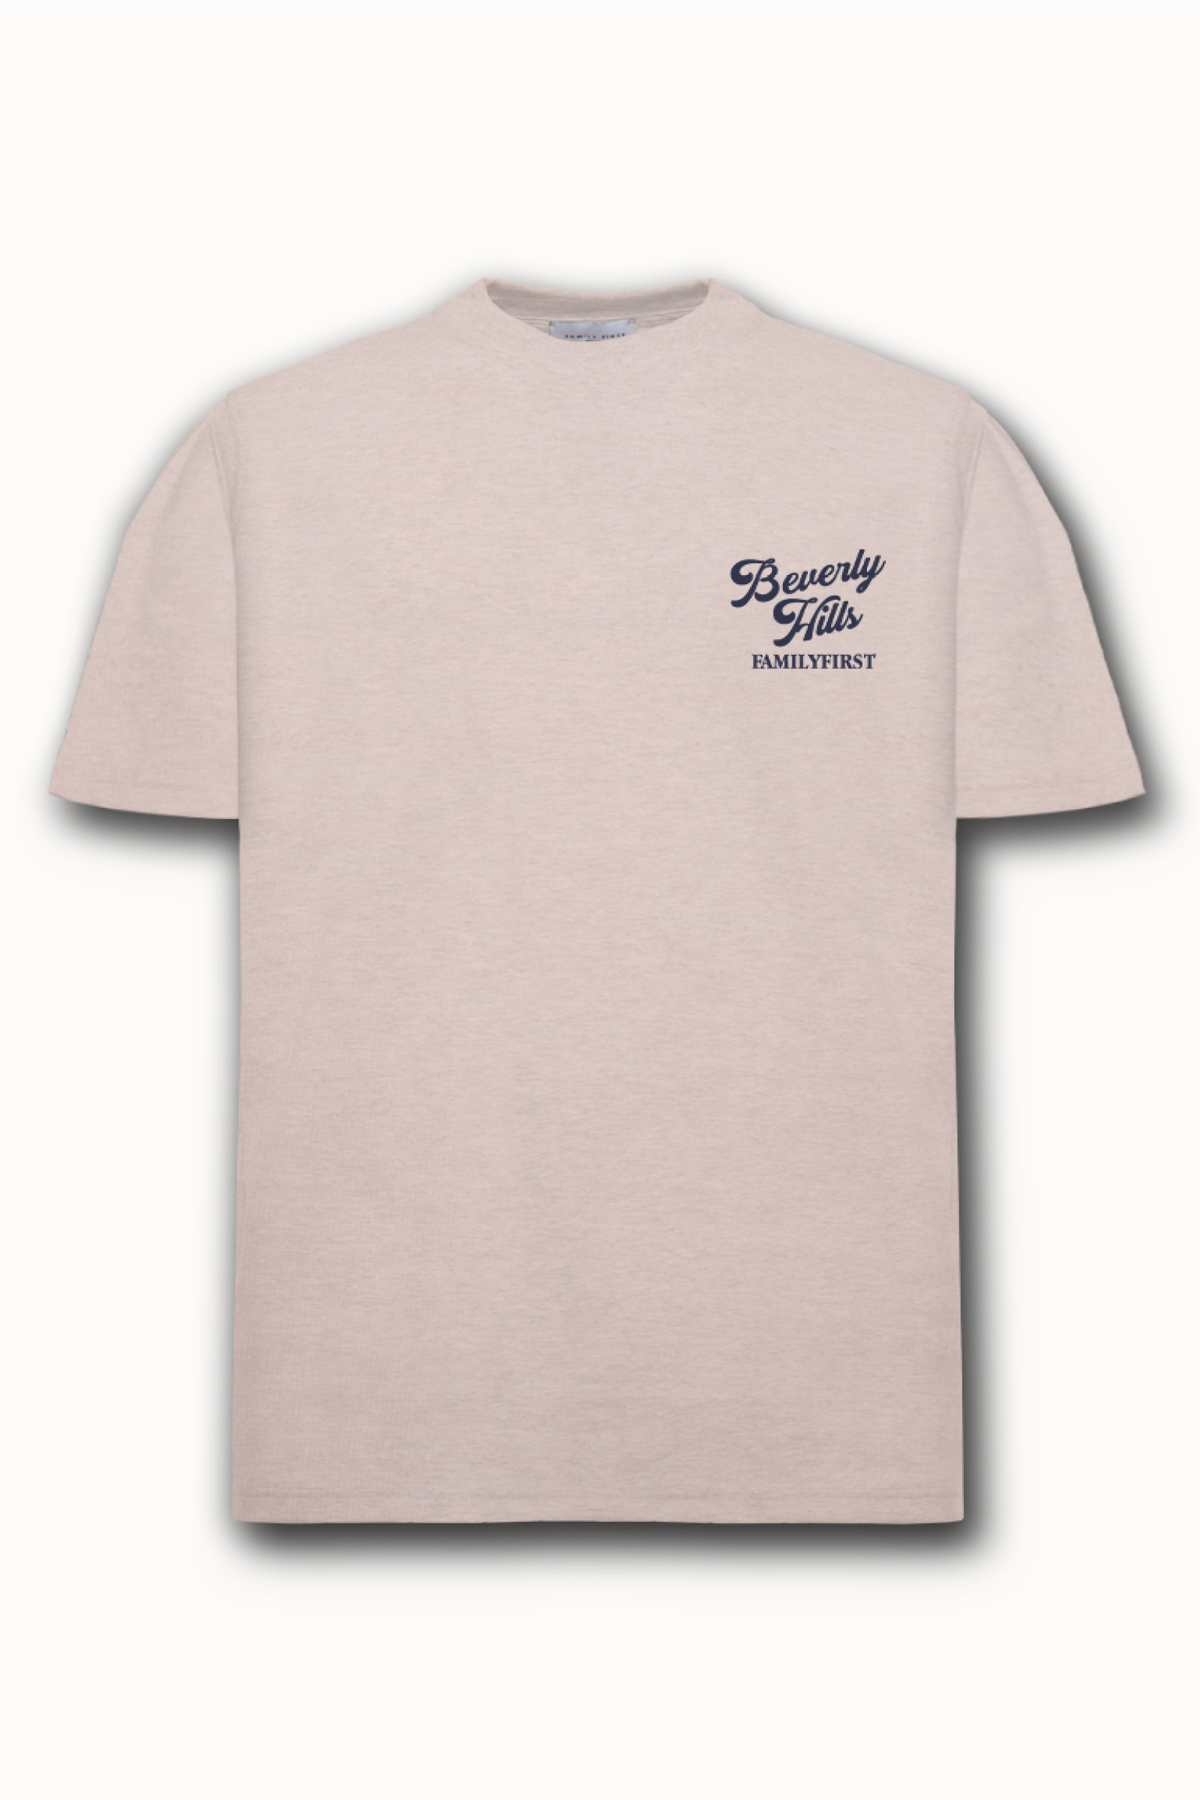 Family First Beverly Hills Tee - Pink